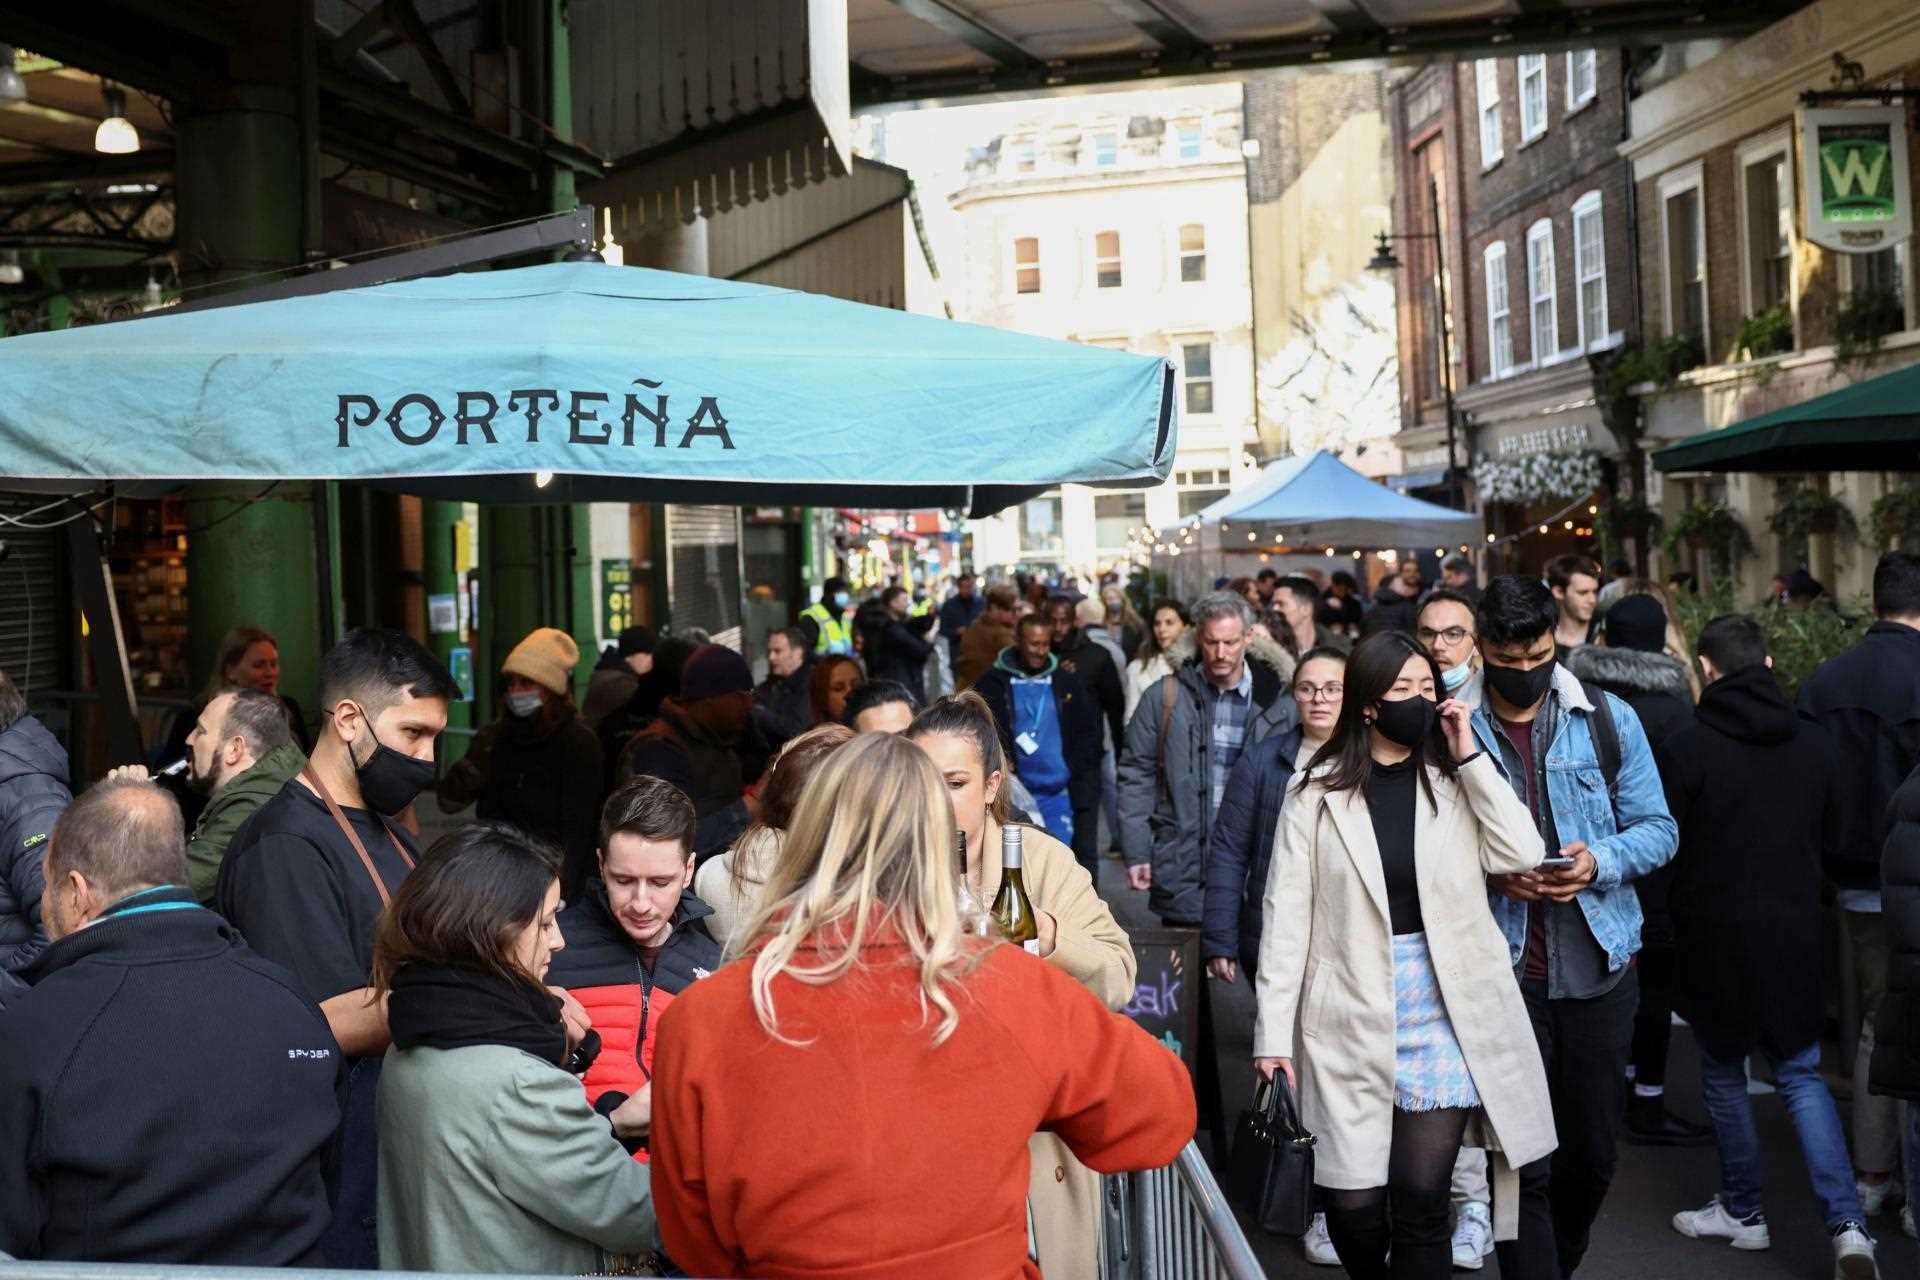 Since April 12, bars also have the right to raise the curtain and are therefore taken by storm, as here in London on April 16.  Service can only be provided on the terrace and, in theory, two meters are required between tables, each with a maximum of six people.